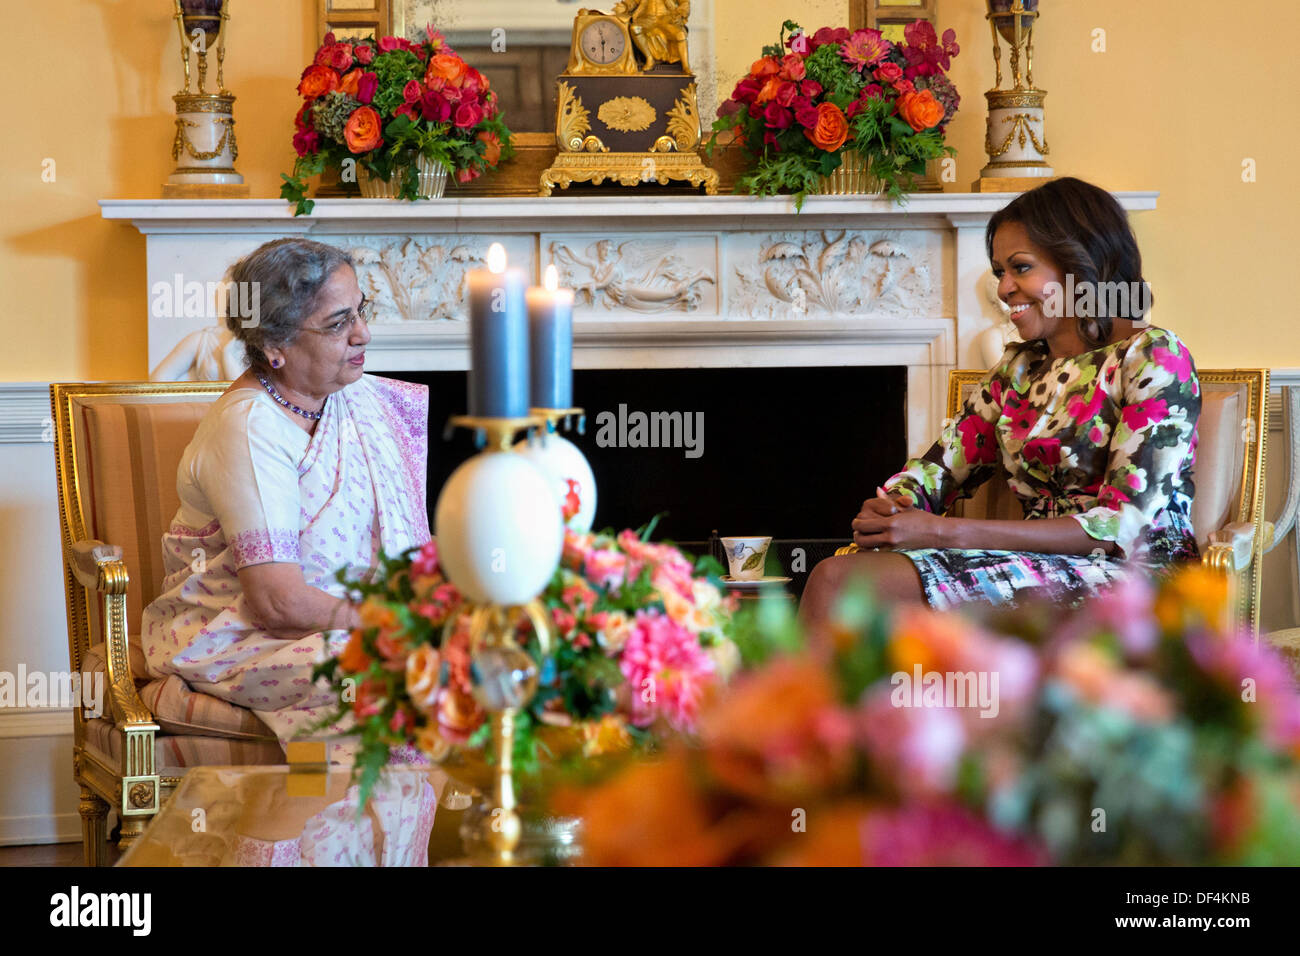 Washington DC, USA. 27th Sep, 2013. US First Lady Michelle Obama hosts a tea for Mrs. Gursharan Kaur, wife of Prime Minister Manmohan Singh of India, in the Yellow Oval Room of the White House September 27, 2013 in Washington, DC. Credit:  Planetpix/Alamy Live News Stock Photo